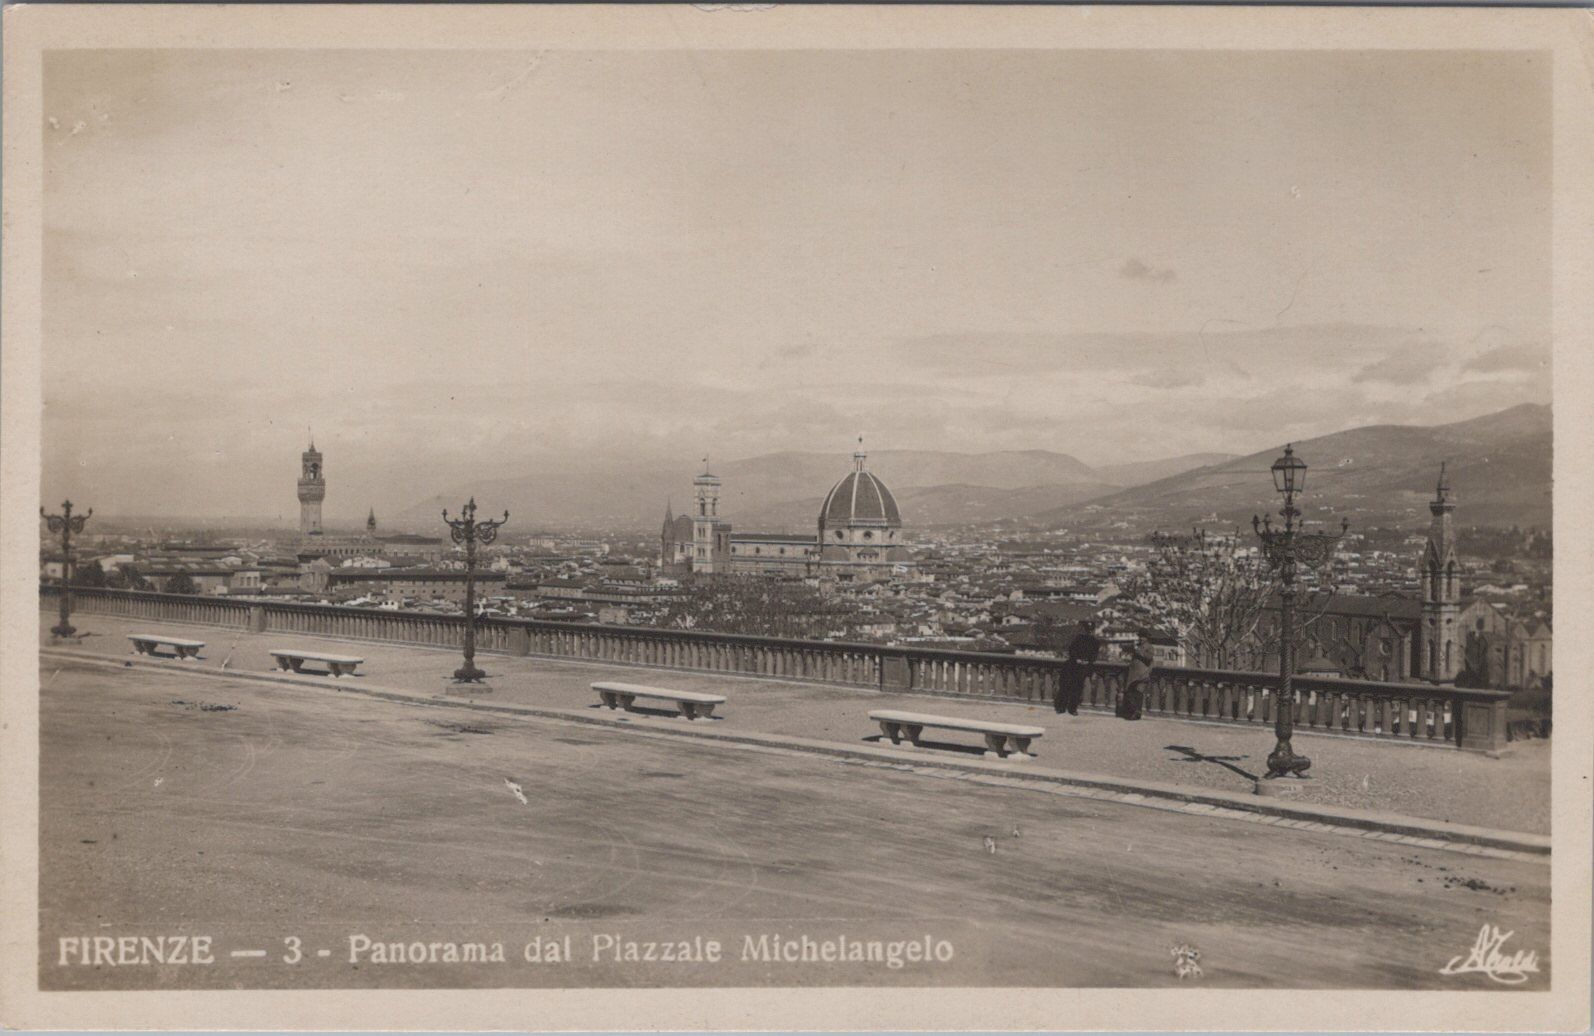 Panorama from Piazzale Michelangelo,Firenze,Italy RPPC Vintage Photo Postcard